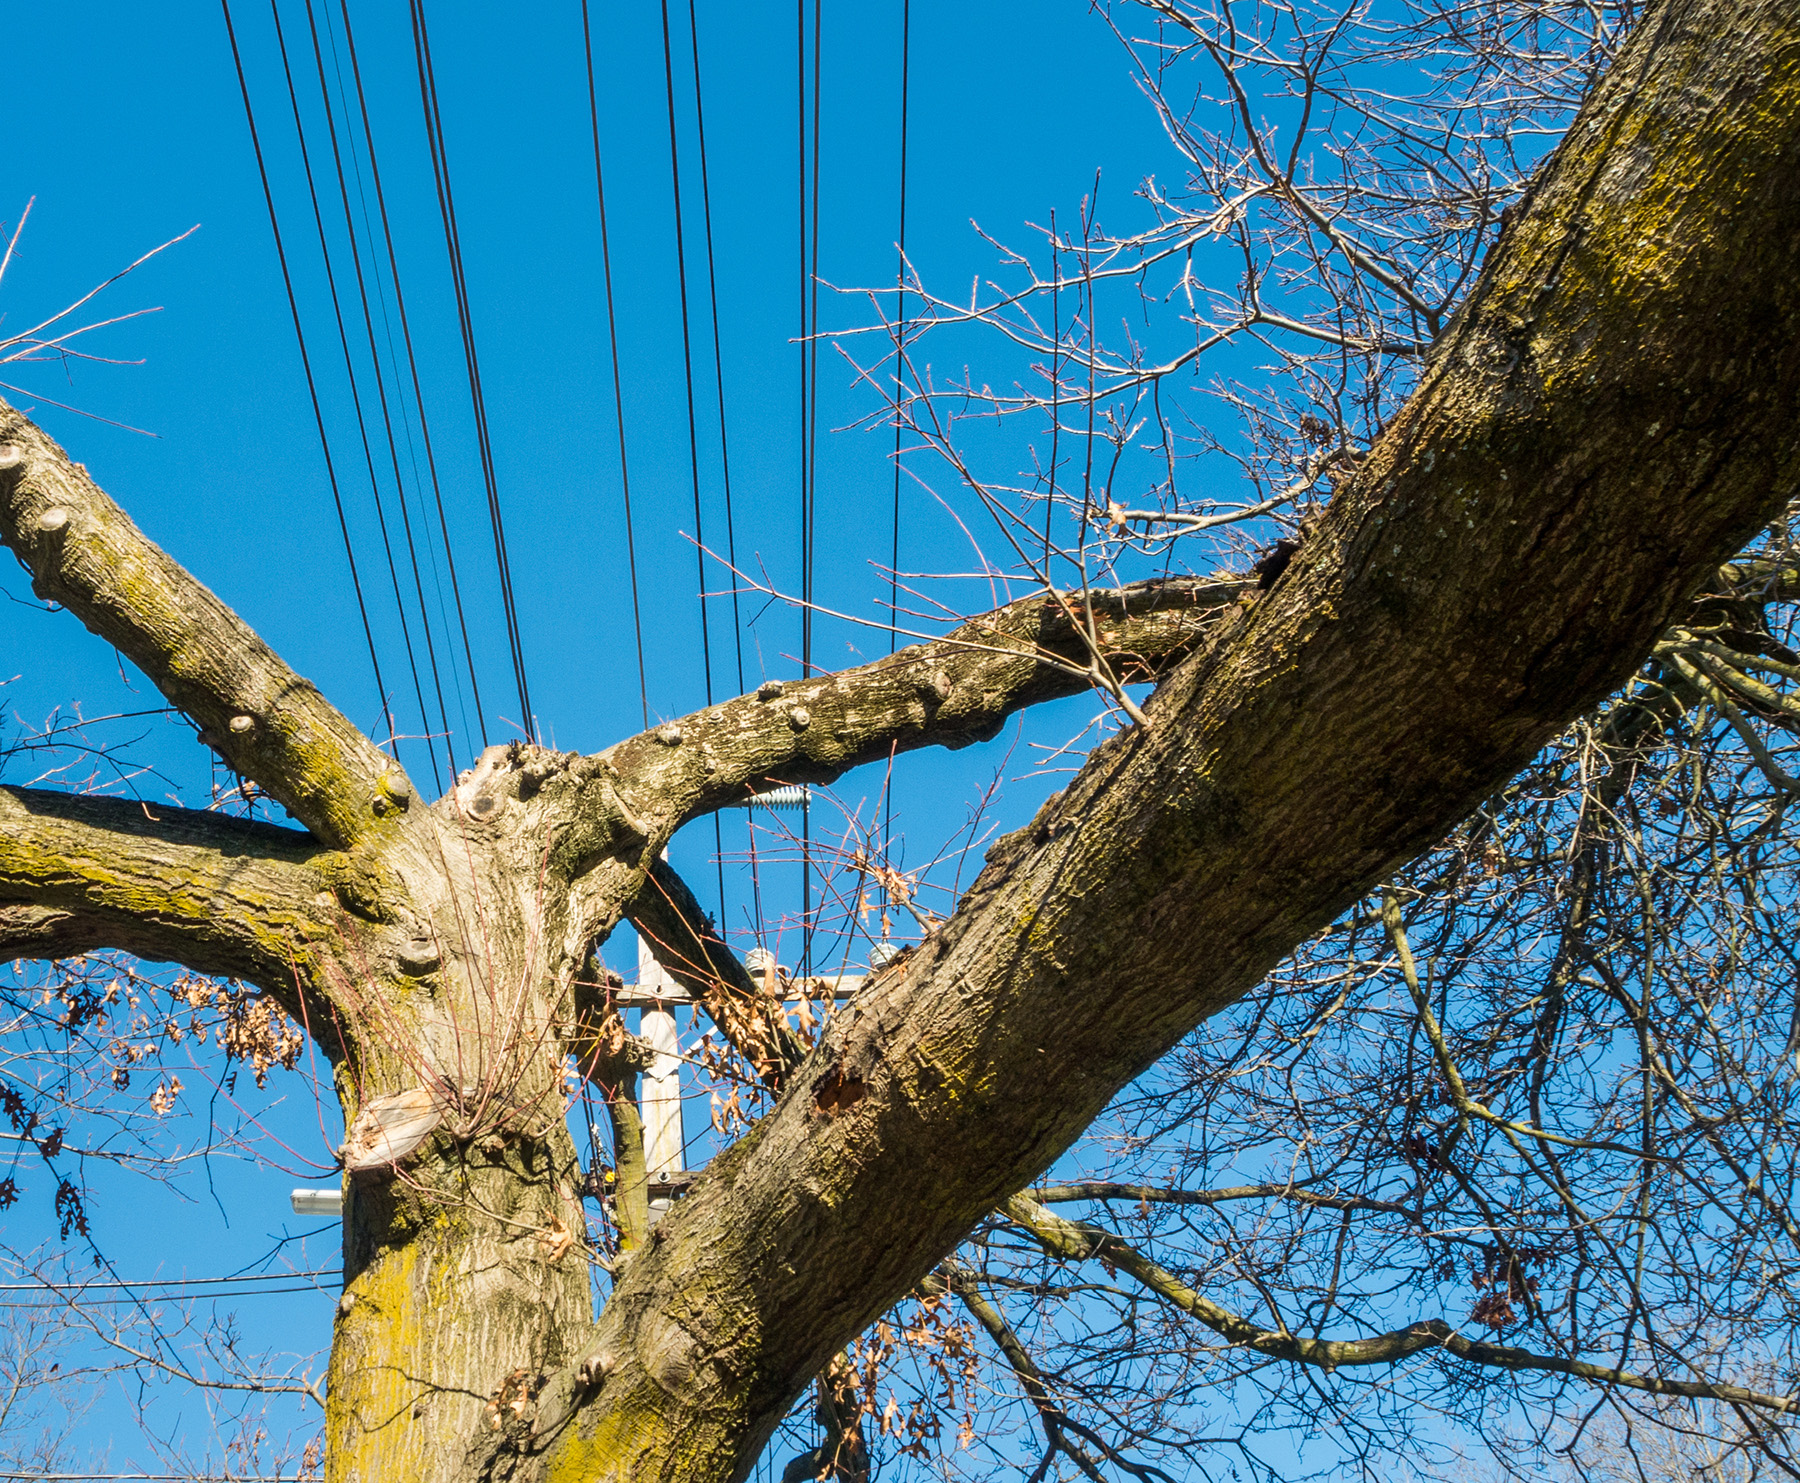 Overhead electrical wires running close to a large tree